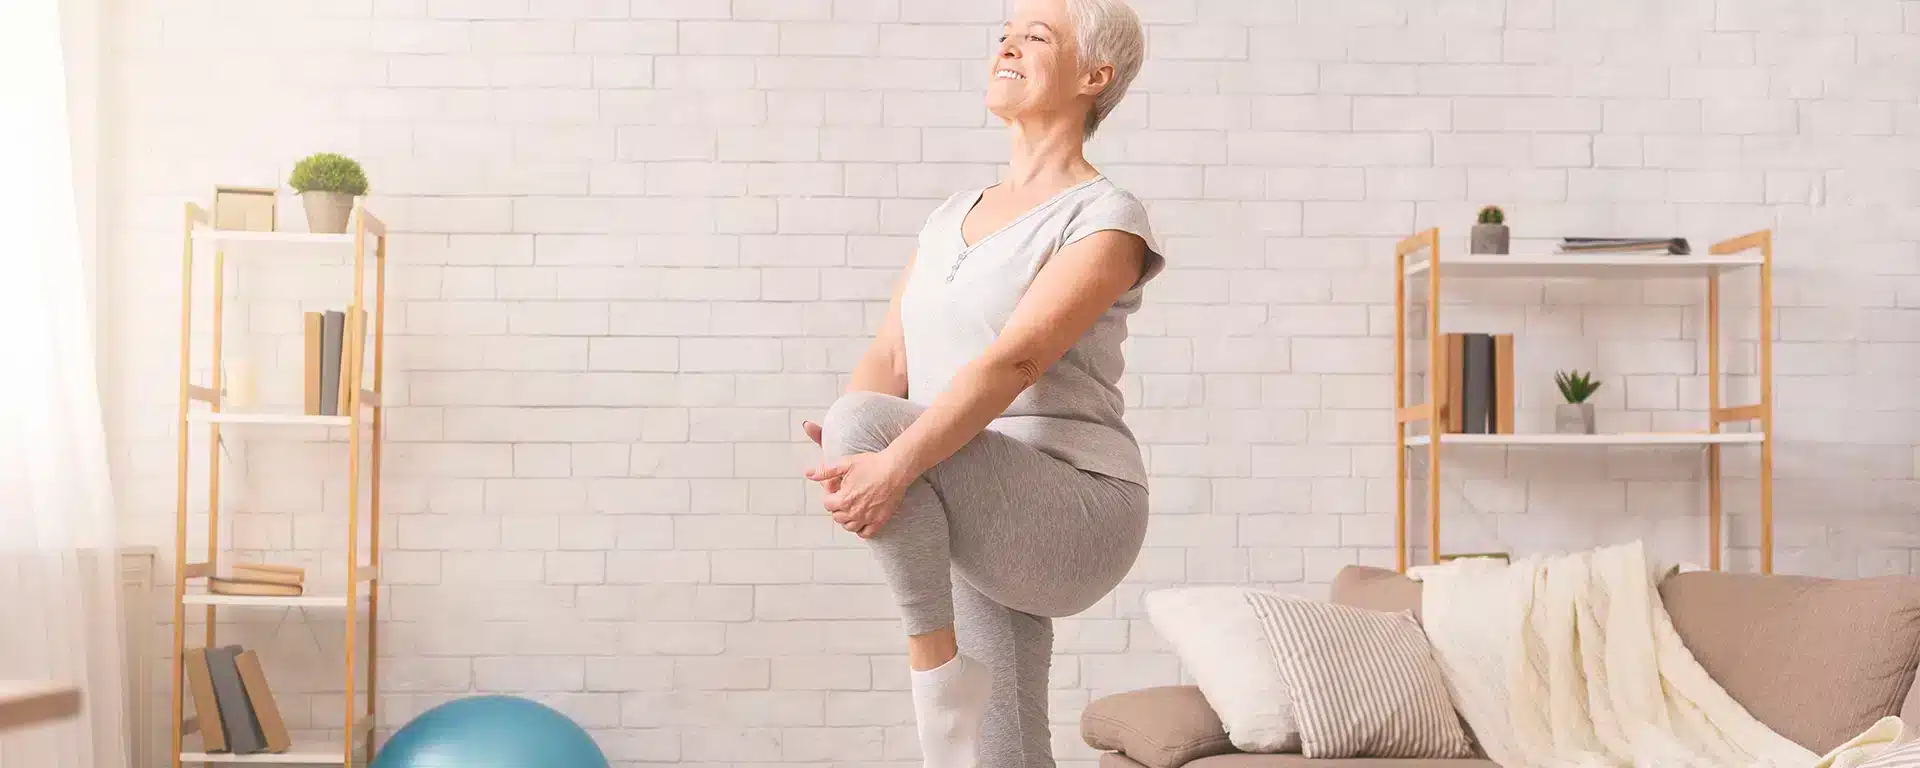 An elderly woman standing & stretching on one leg by pulling the other leg upwards at the knee.